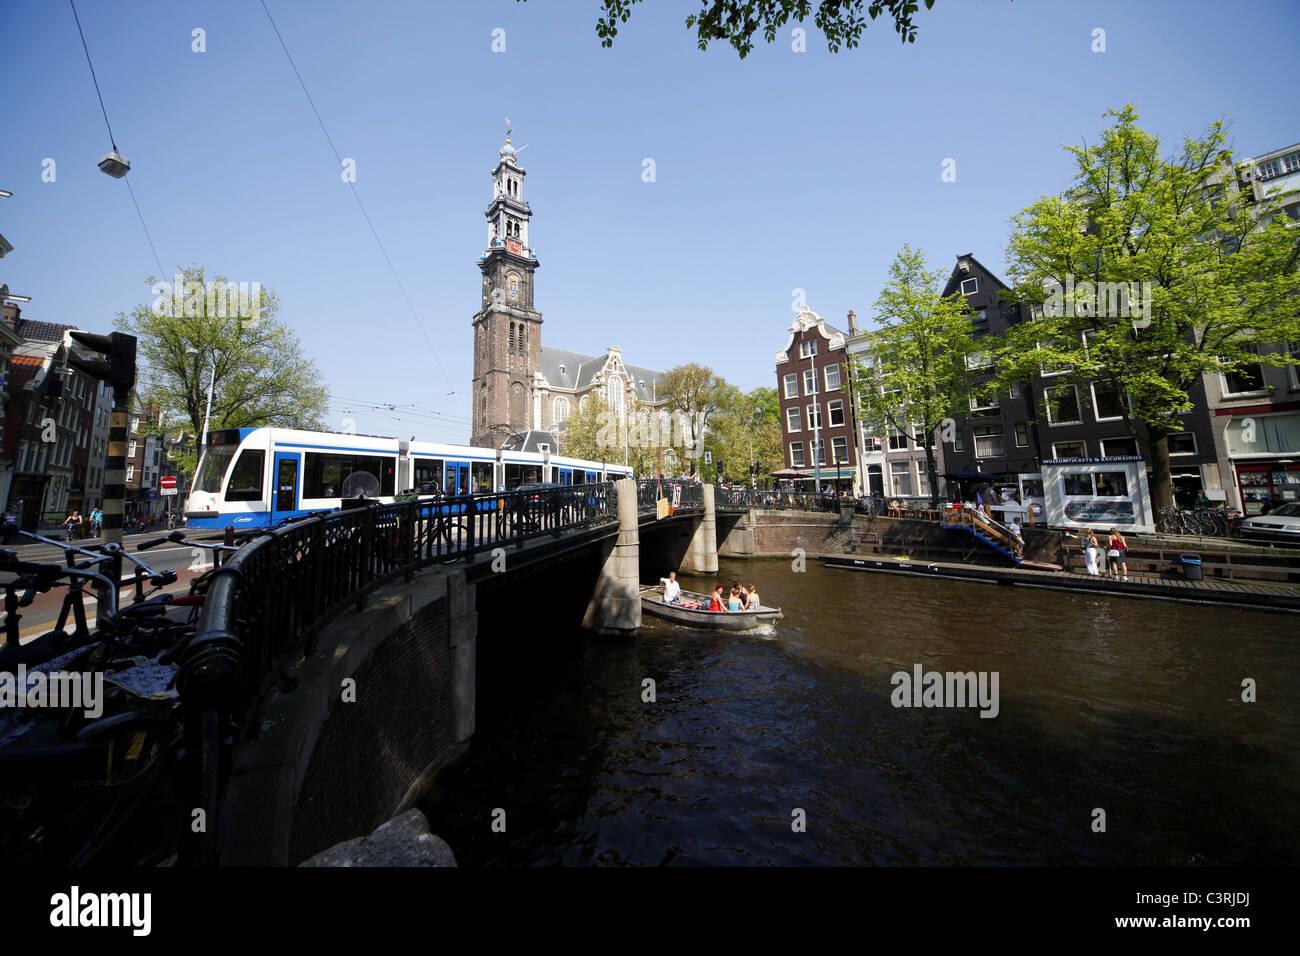 WESTER CHURCH TOWER & CANAL AMSTERDAM HOLLAND 24 April 2011 Stock Photo